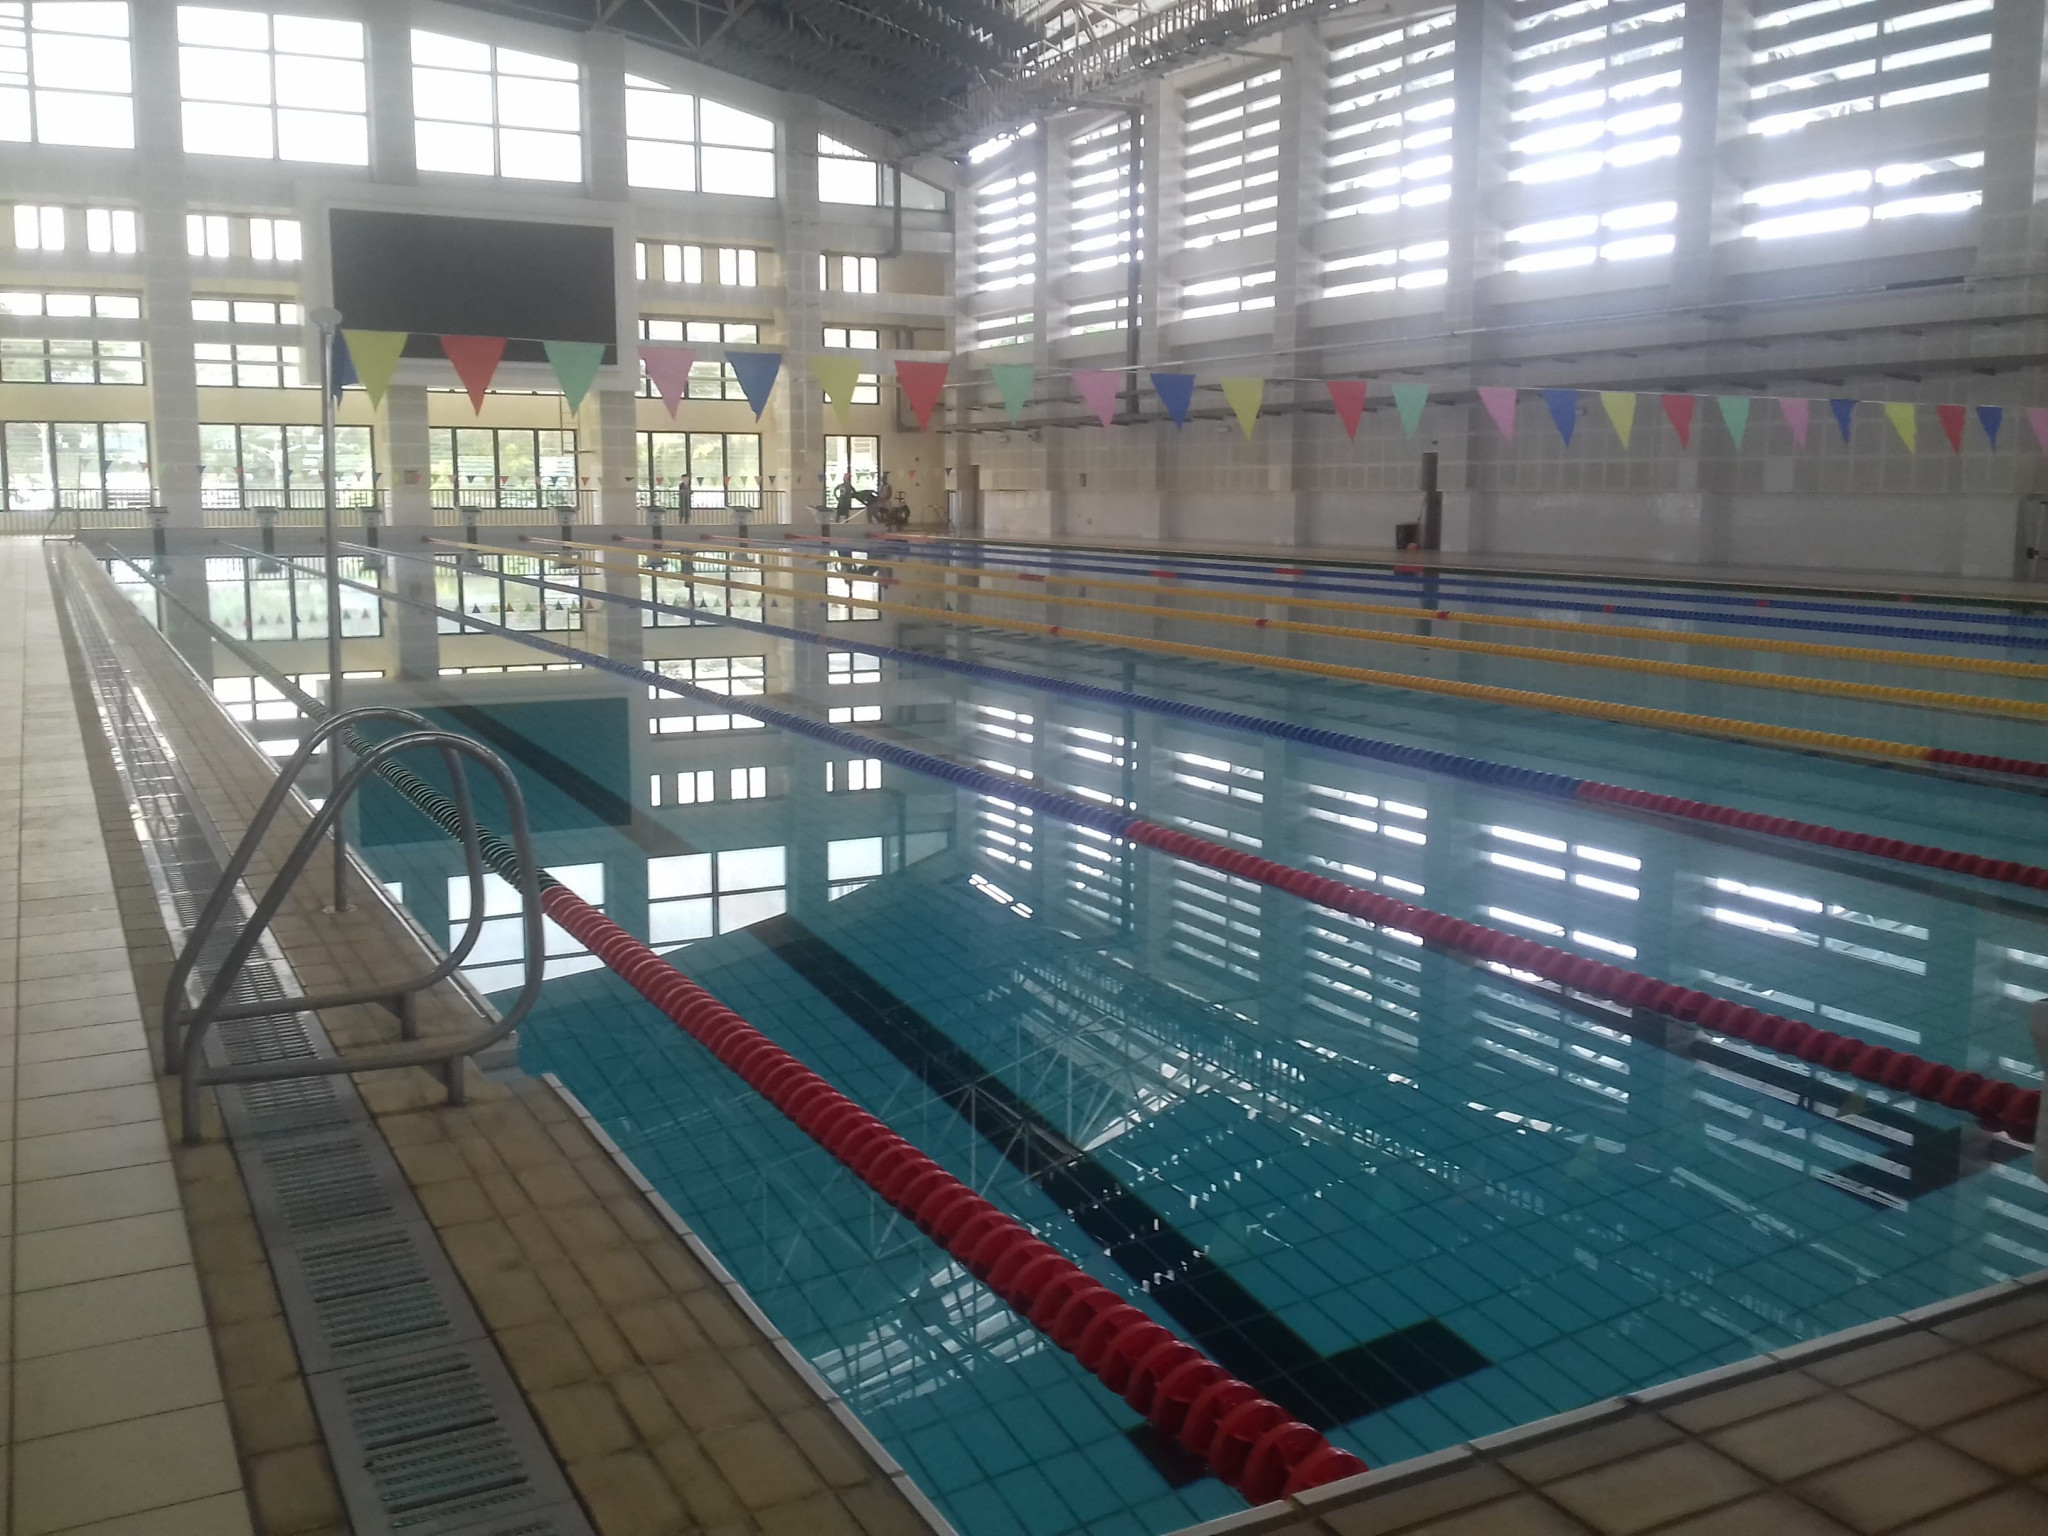 The Faleata swimming venue will be refurbished for the Games ©ITG